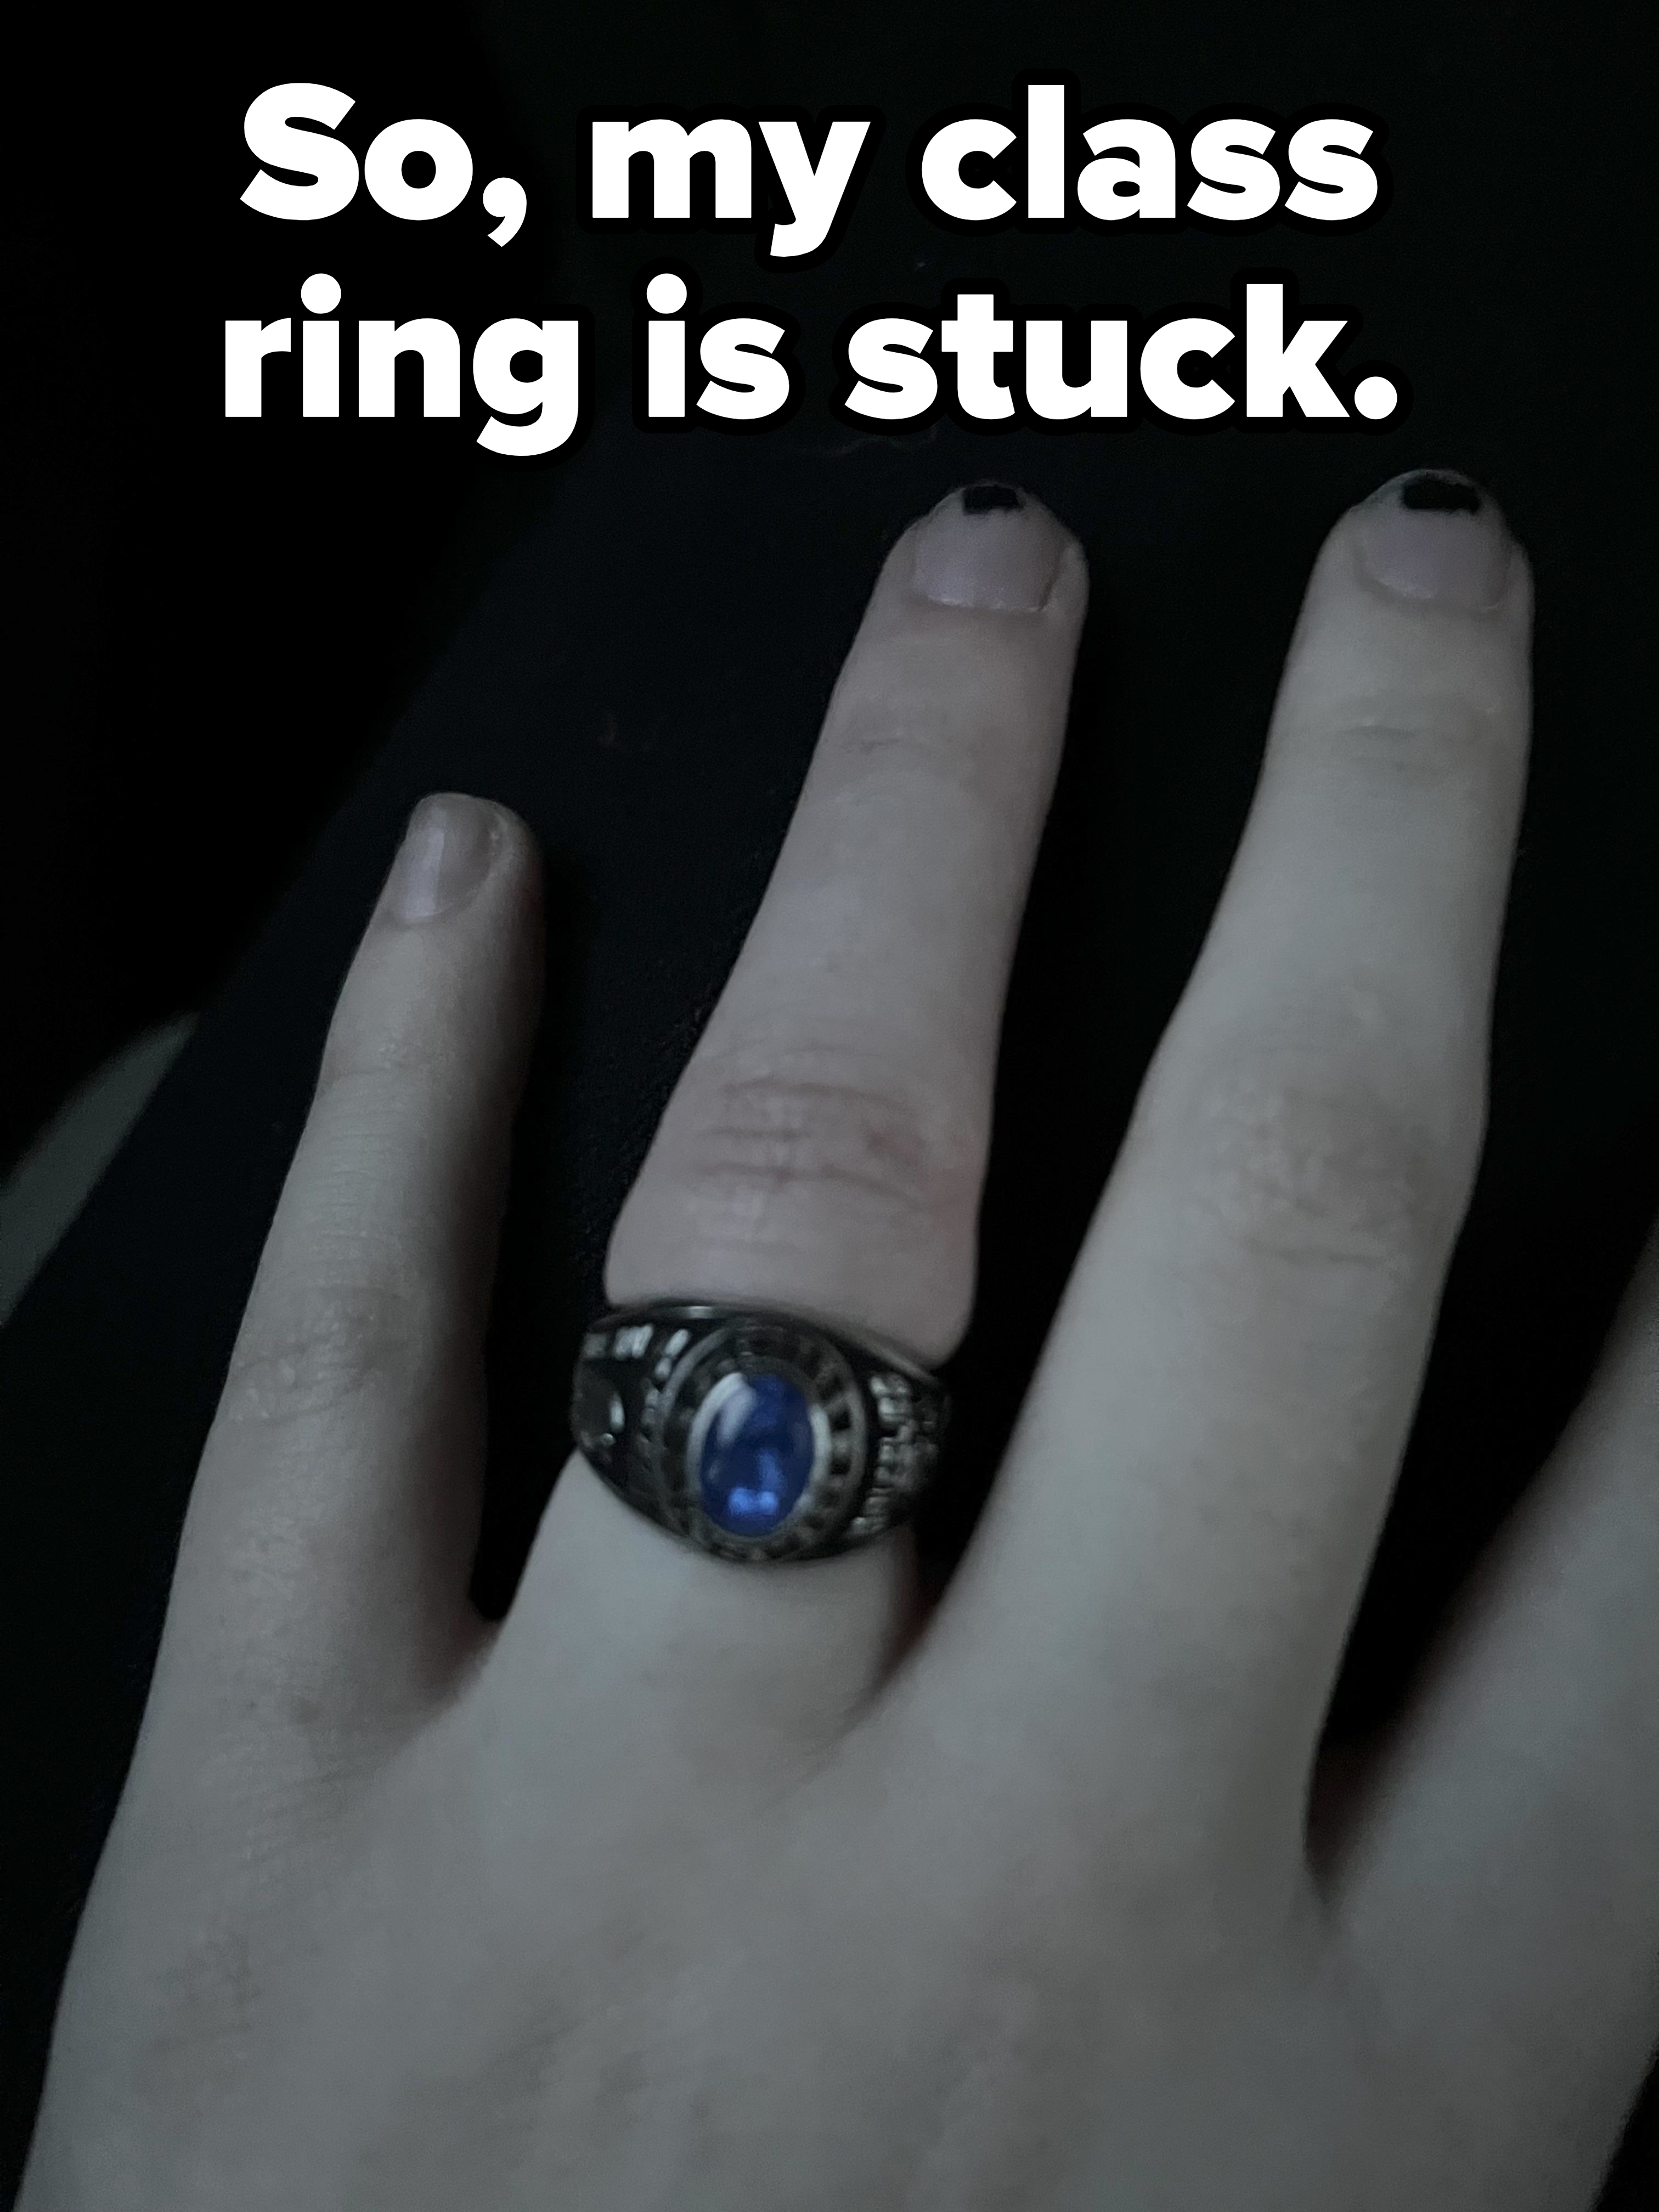 Close-up of a hand with a finger wearing a class ring with a large blue stone that looks very tight, with caption &quot;So, my class ring is stuck&quot;